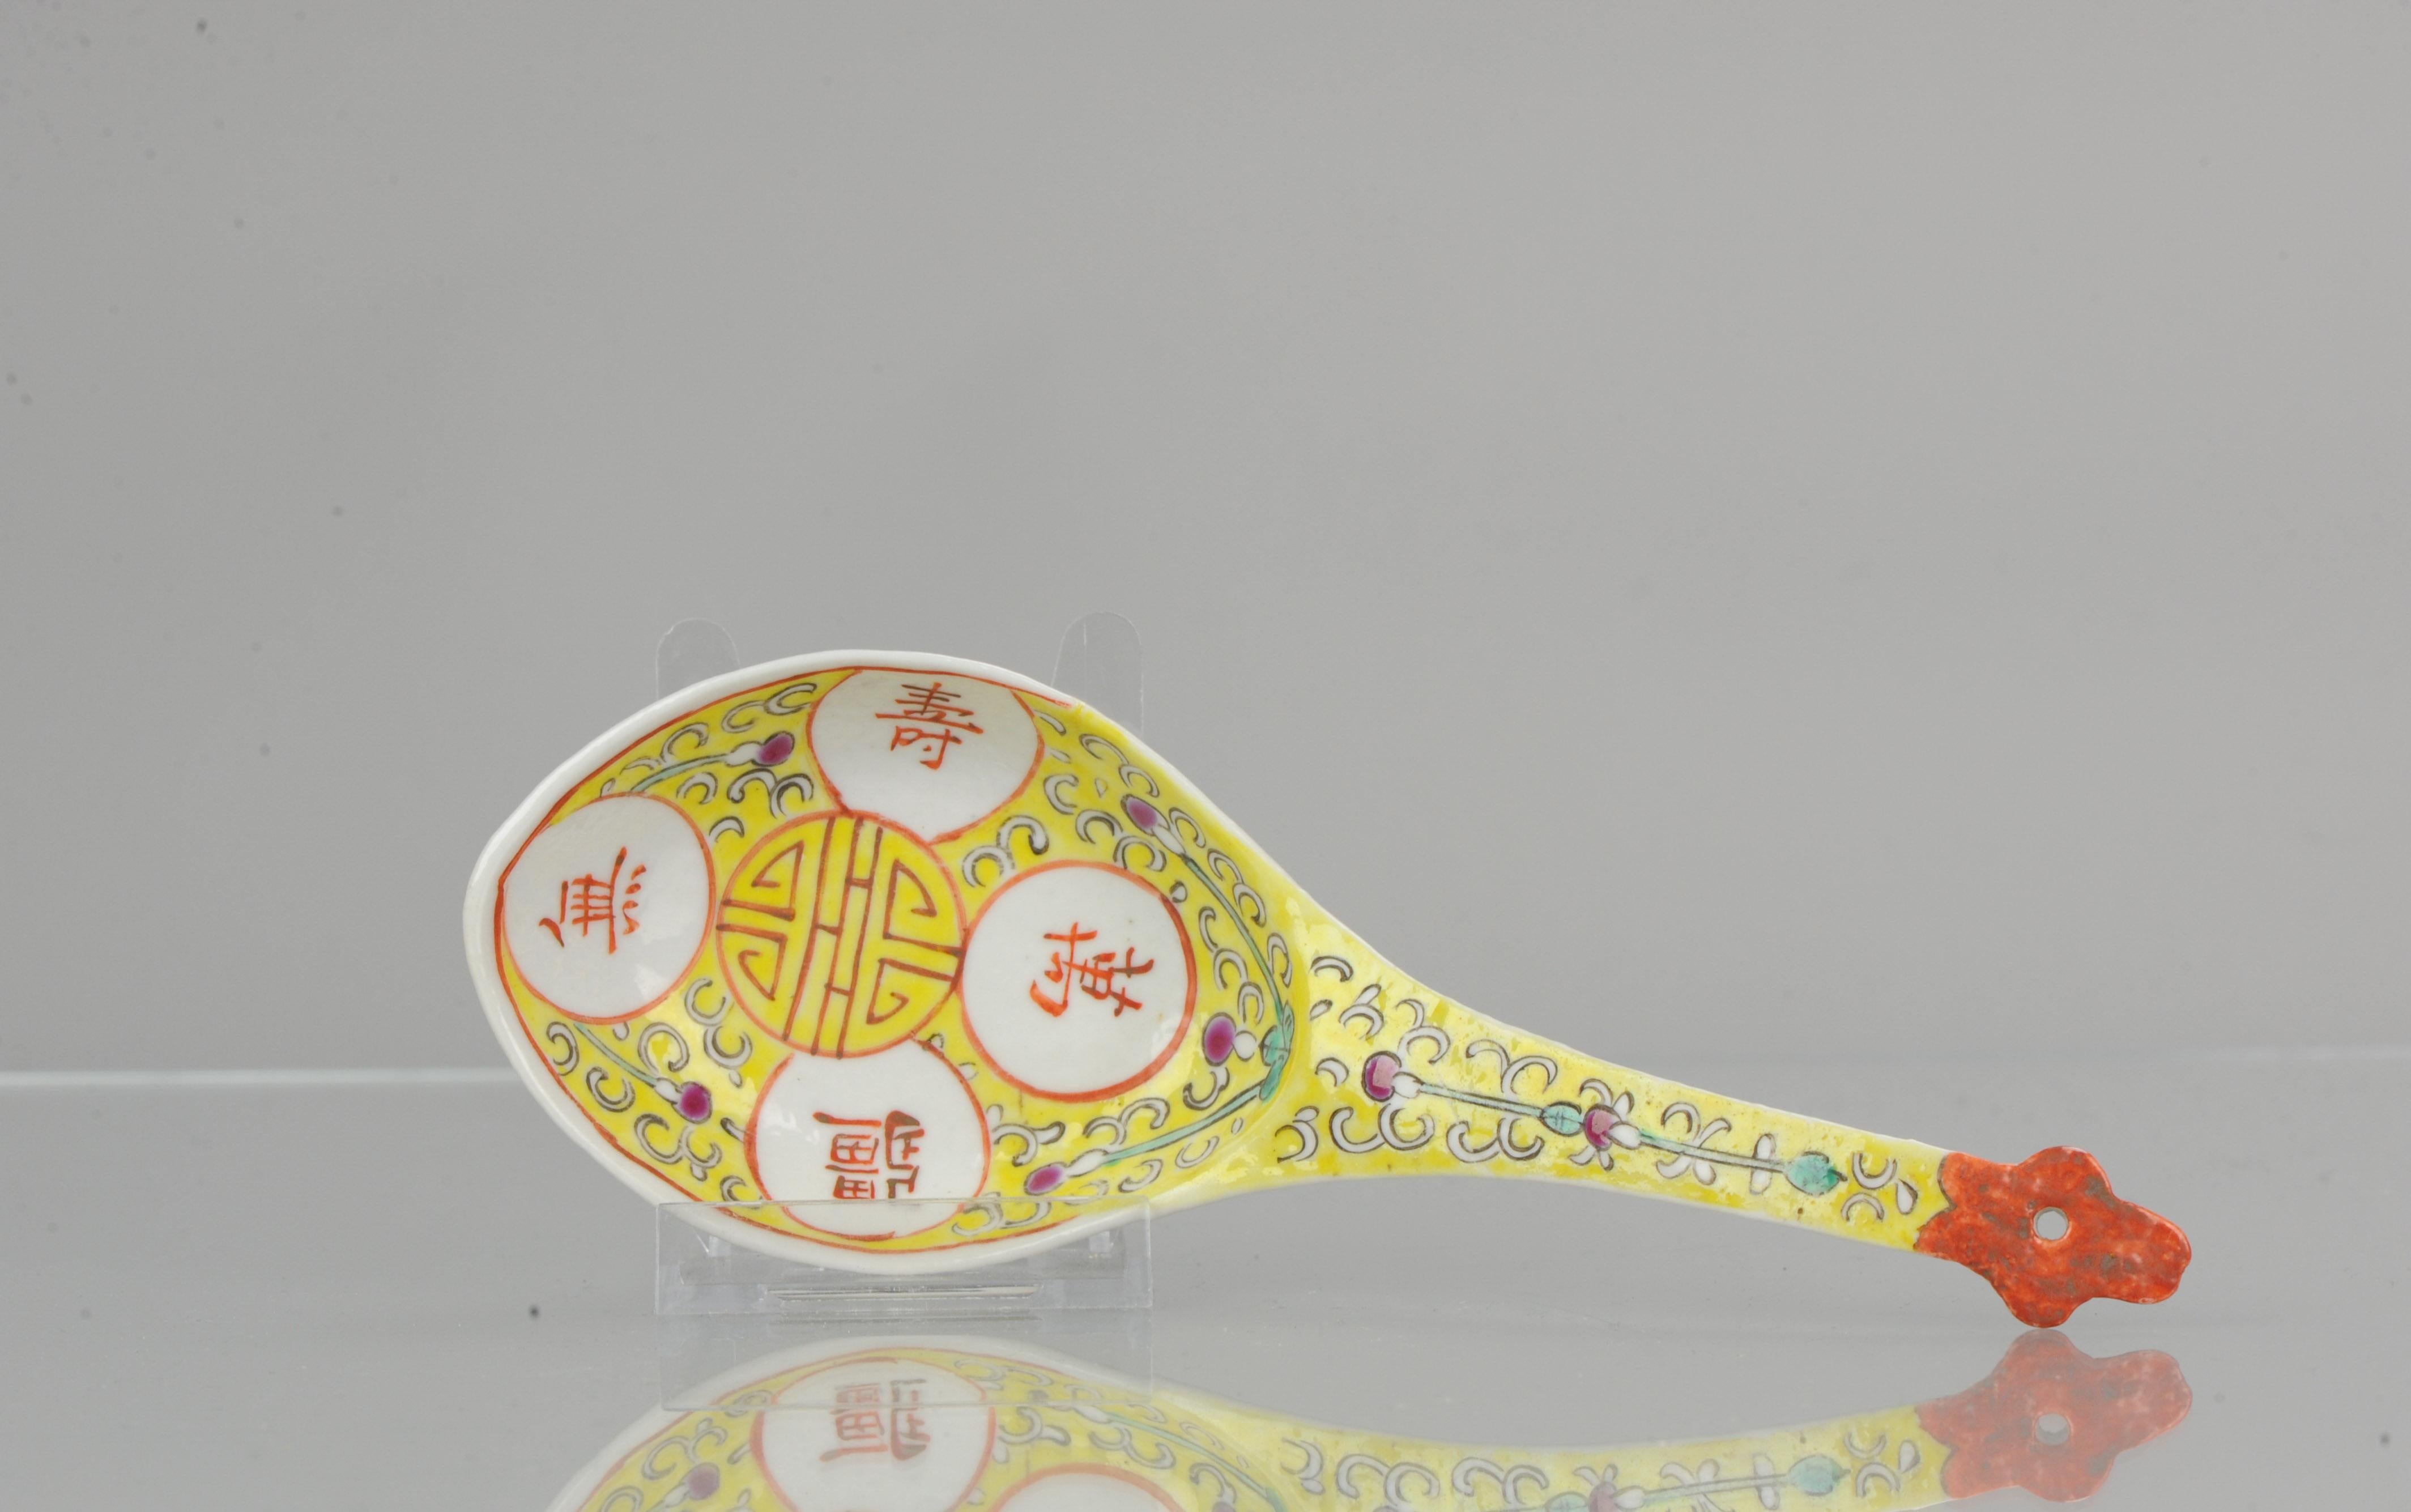 A very nicely decorated Spoon.

Additional information:
Material: Porcelain & Pottery
Region of Origin: China
Period: 20th century PRoC (1949 - now)
Condition: Size Perfect, some small firing flaws only.
Dimension: 21 L cm